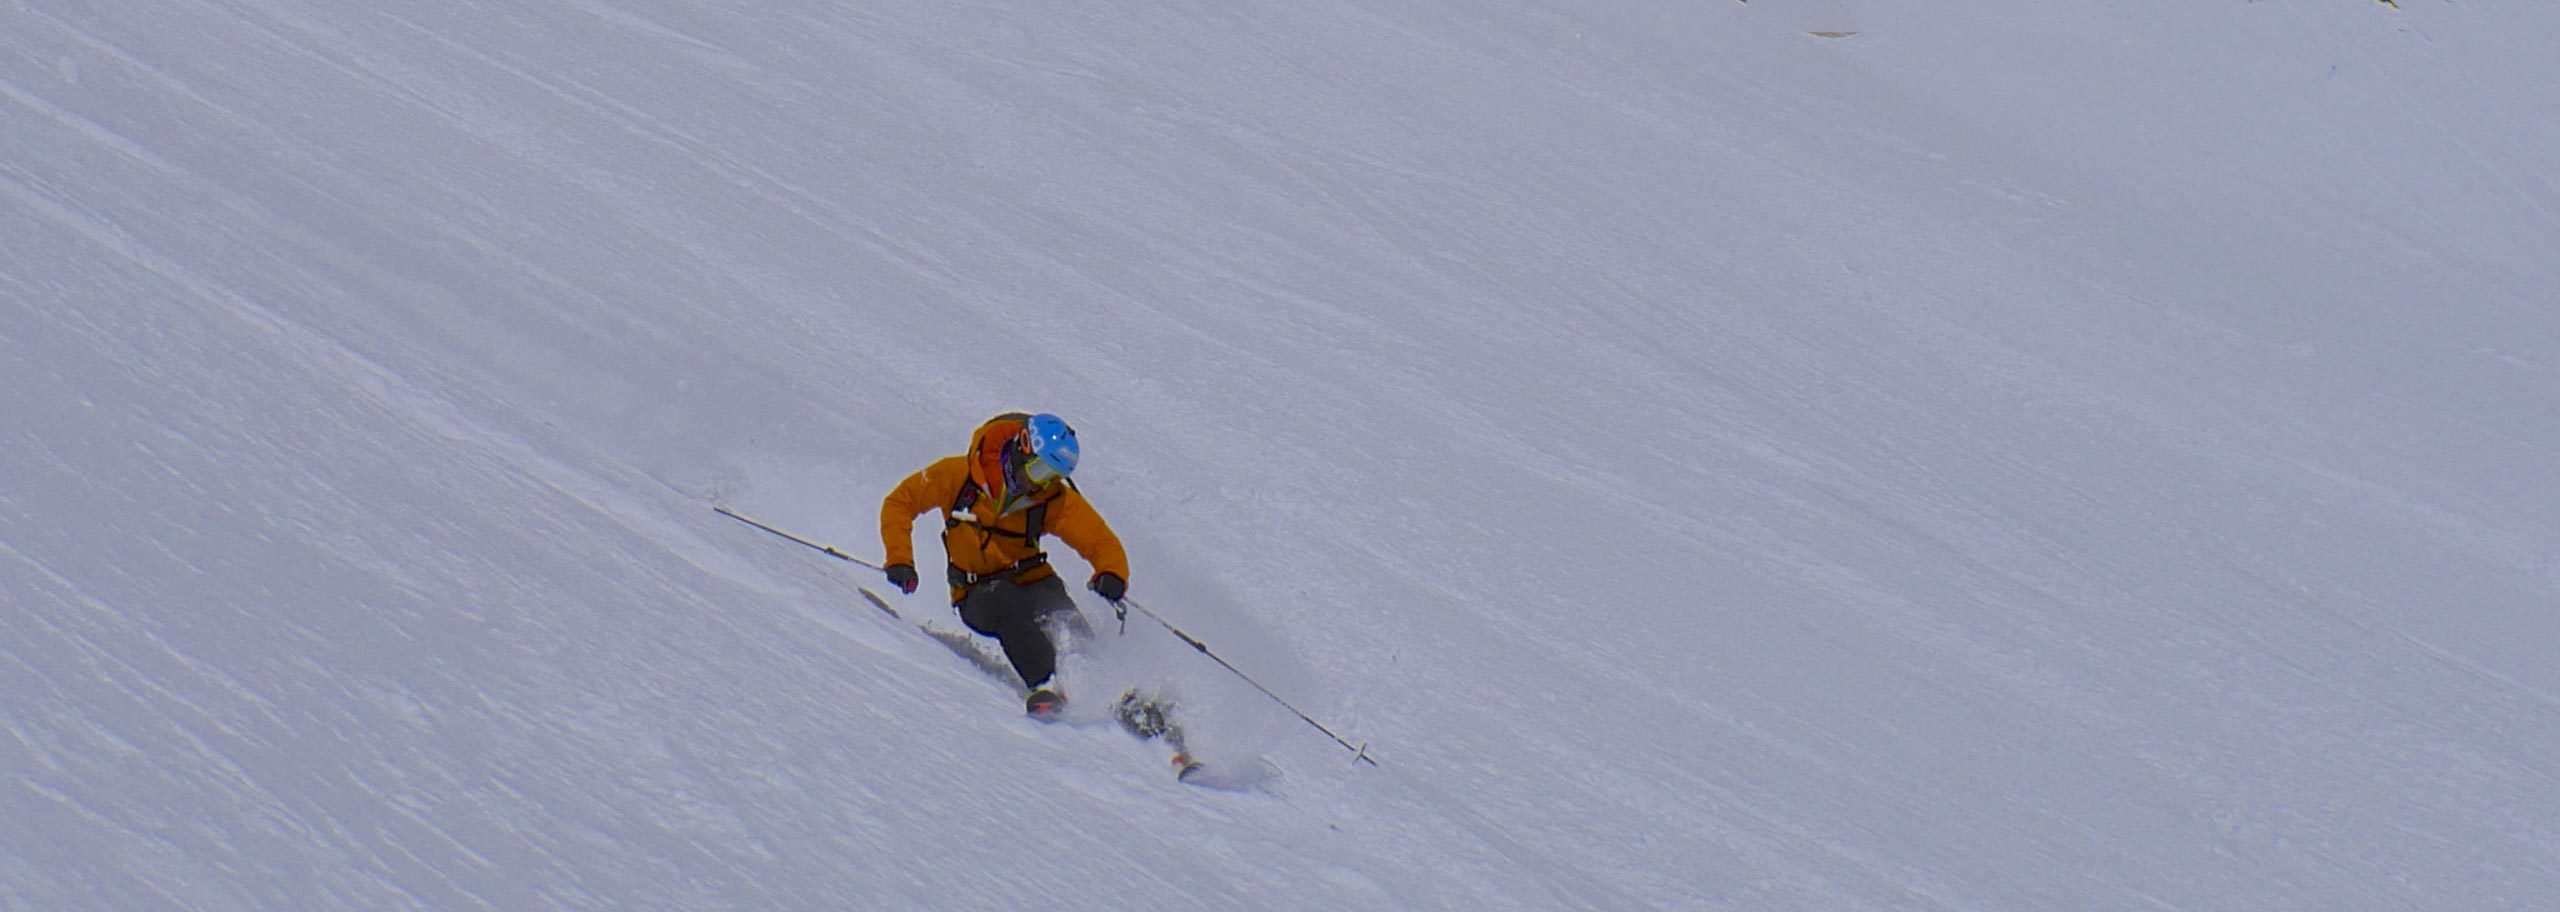 Off-piste Skiing in Pescocostanzo with Mountain Guide